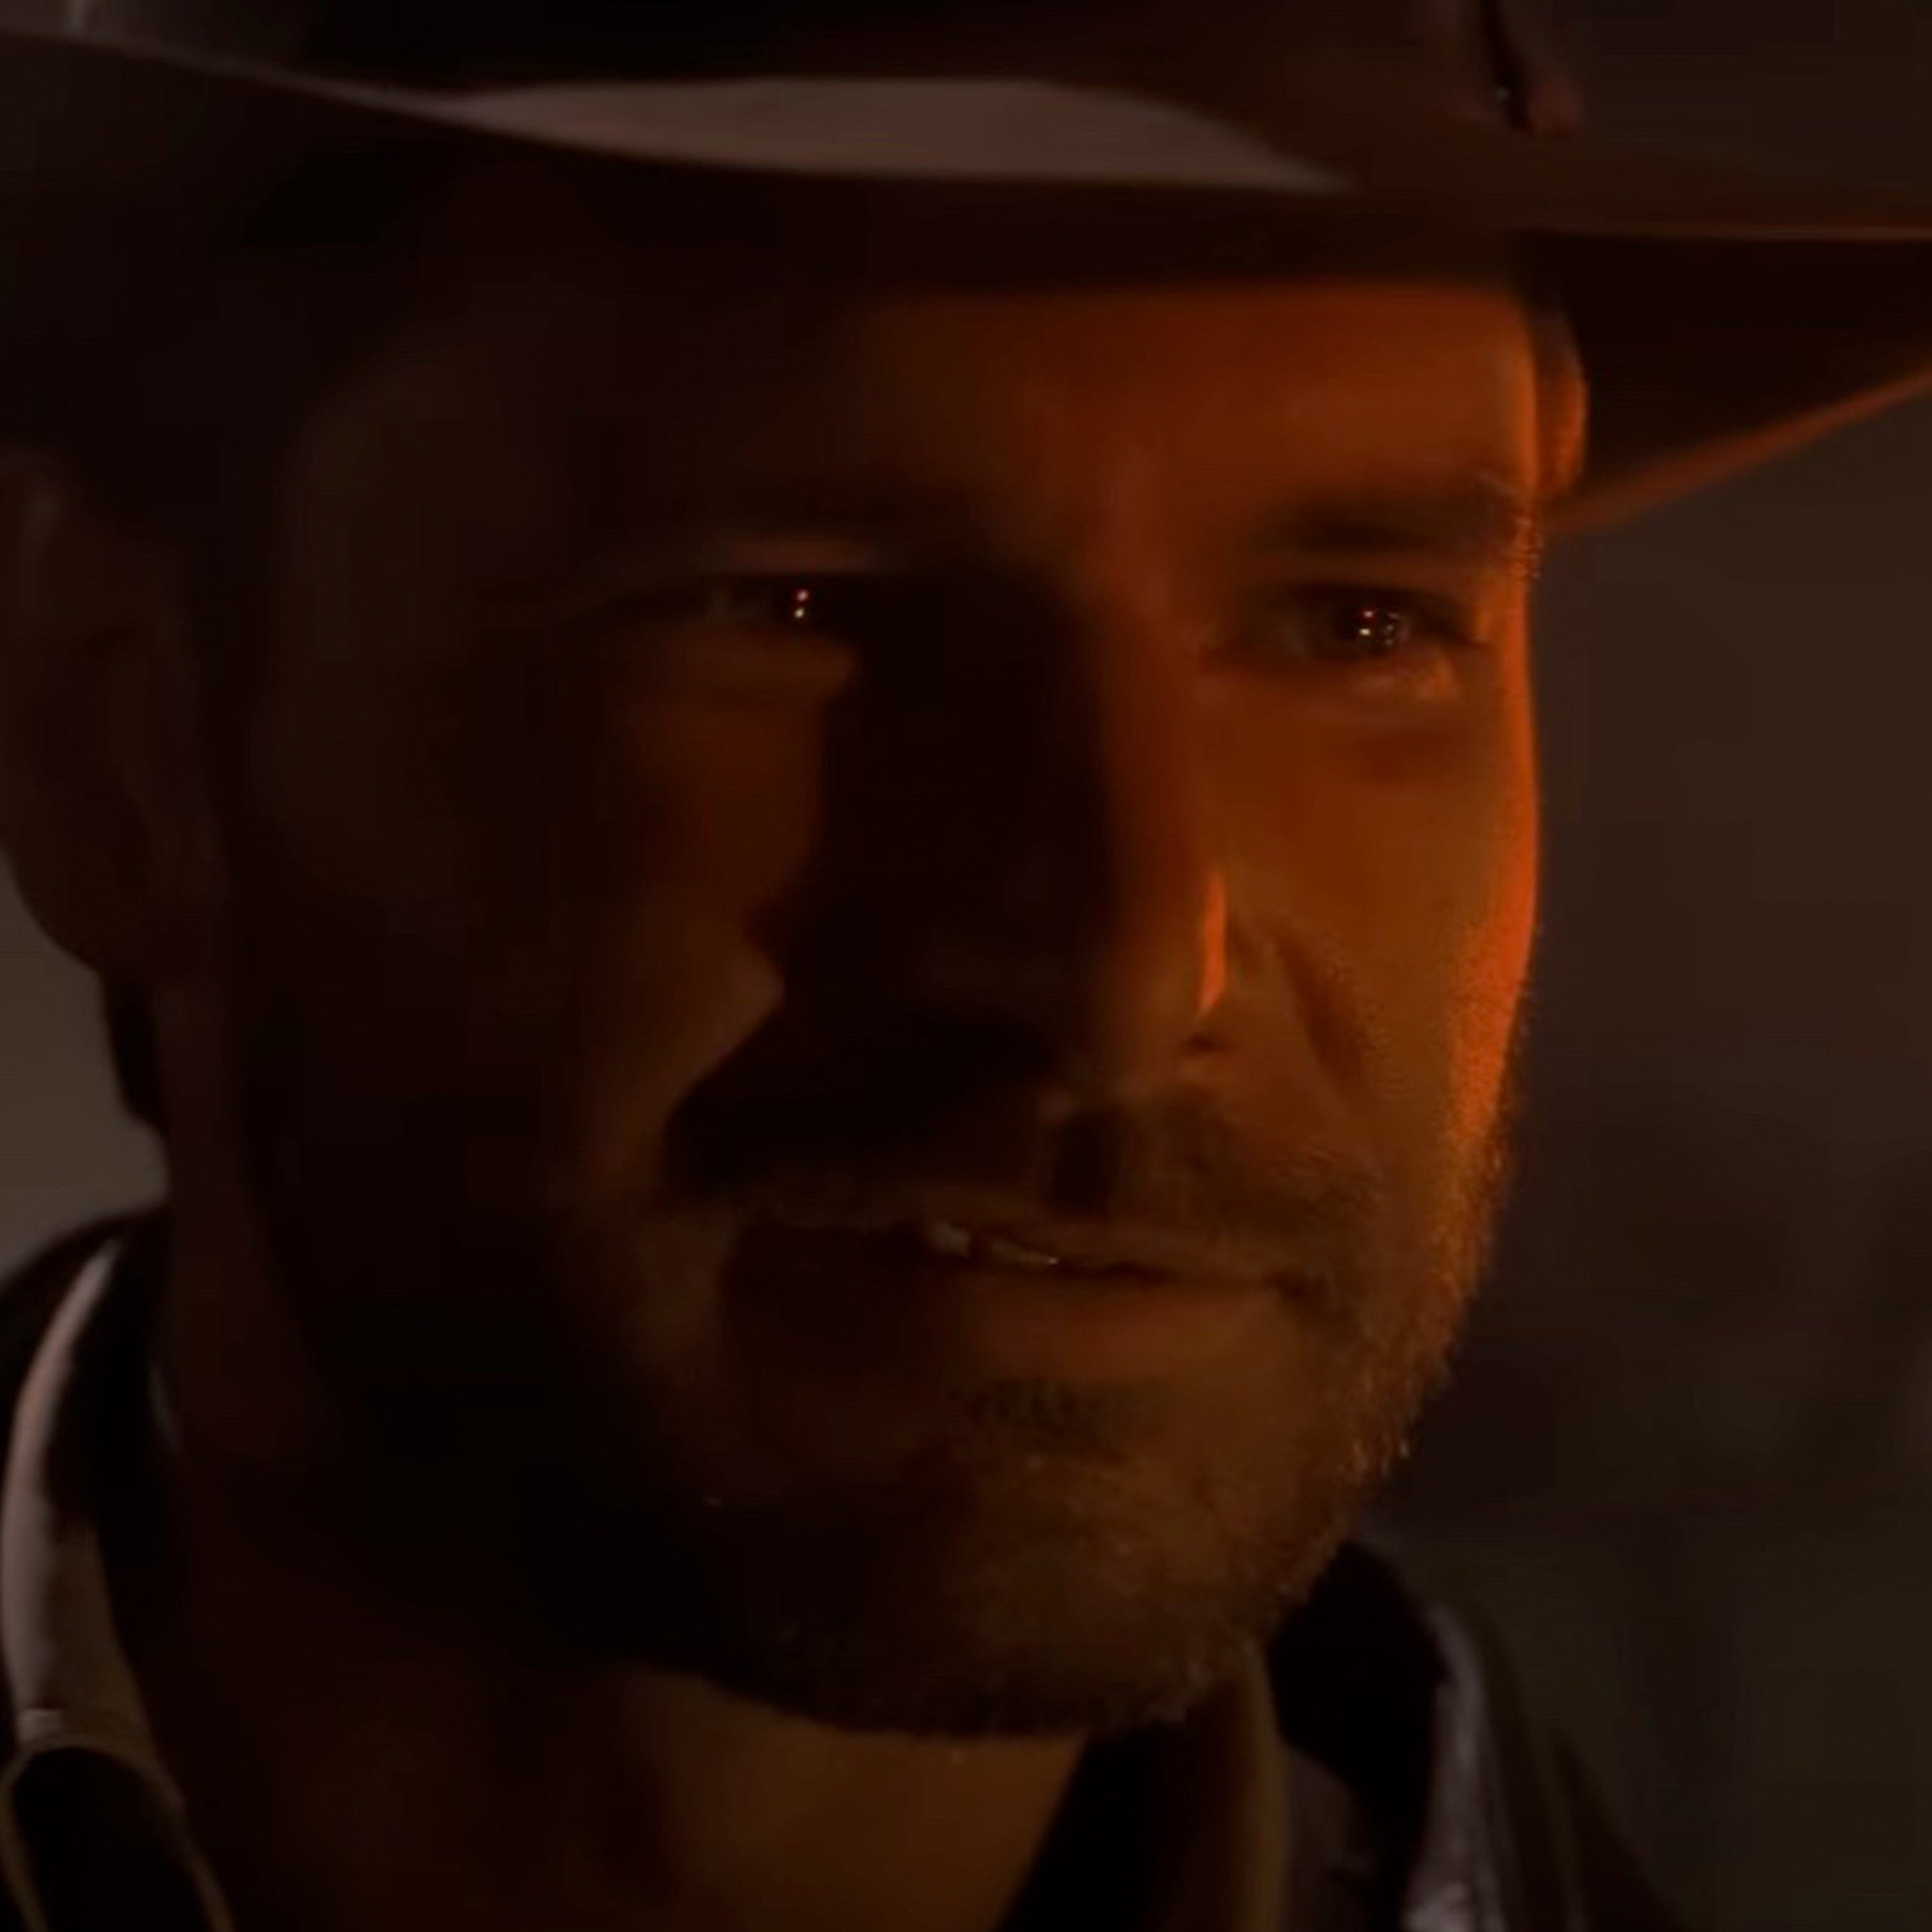 Watch the many adventures of Harrison Ford when "Indiana Jones" comes to Disney+ this month.